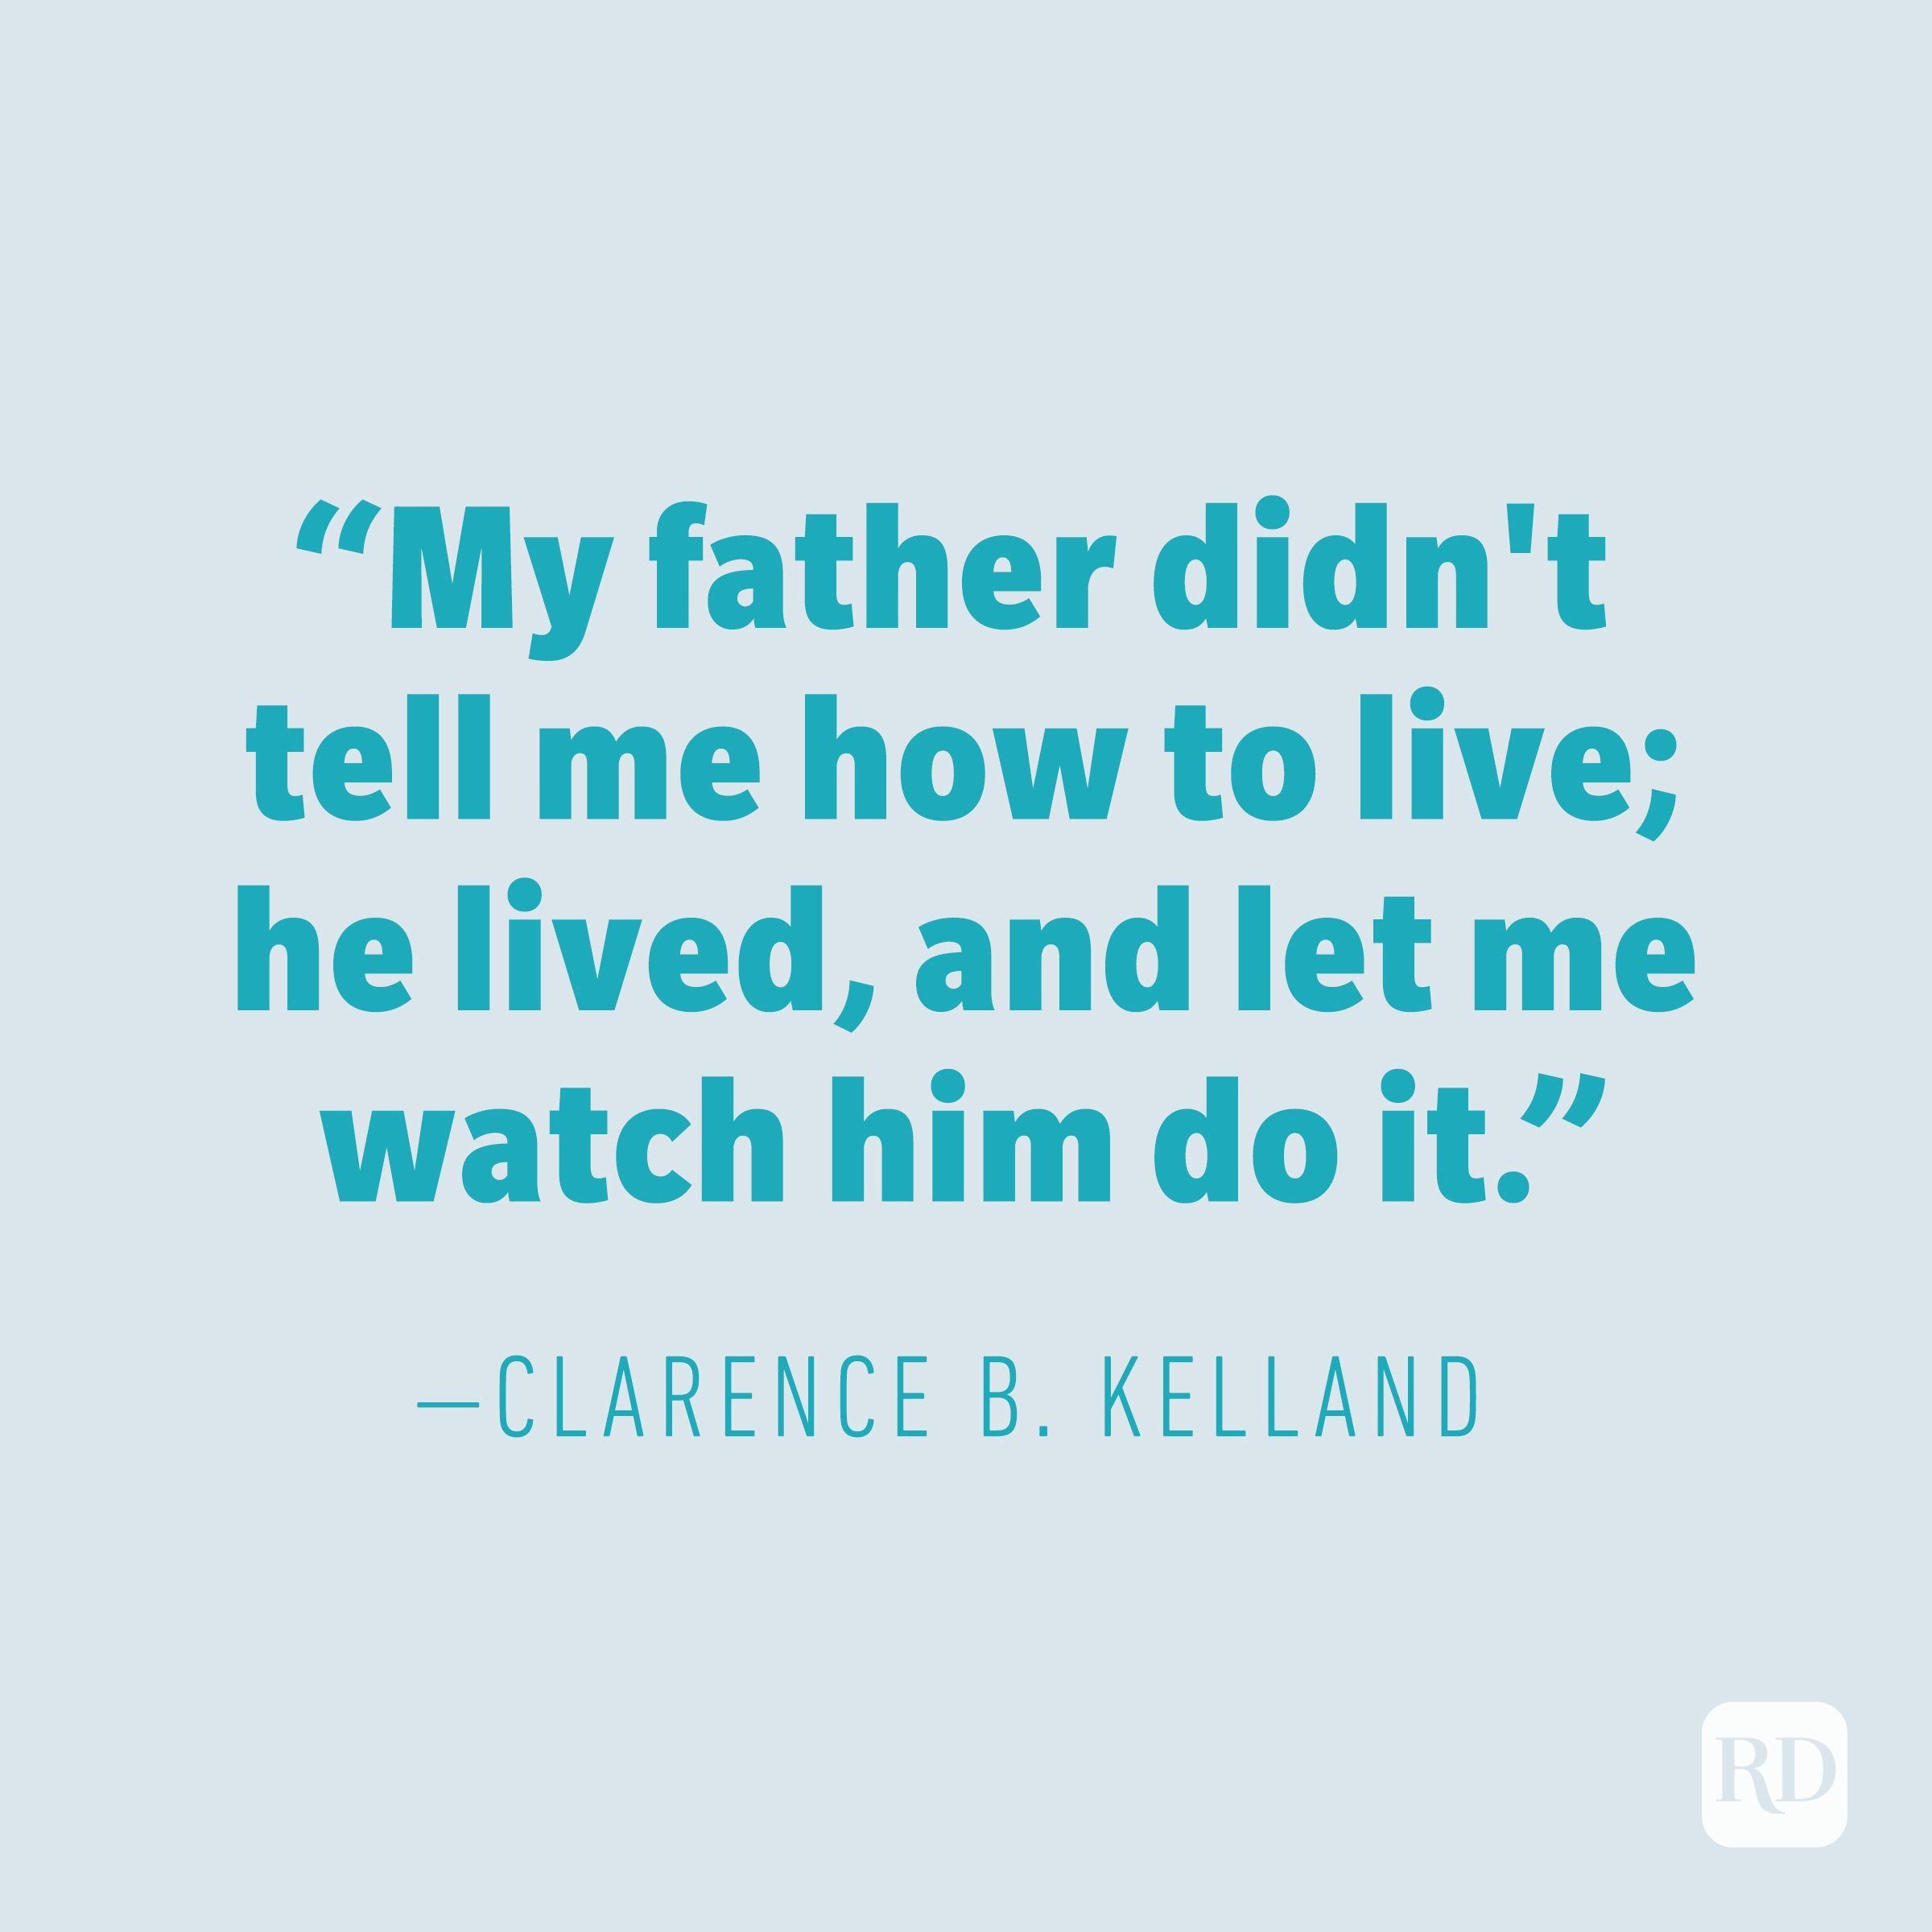 Clarence B. Kelland quote